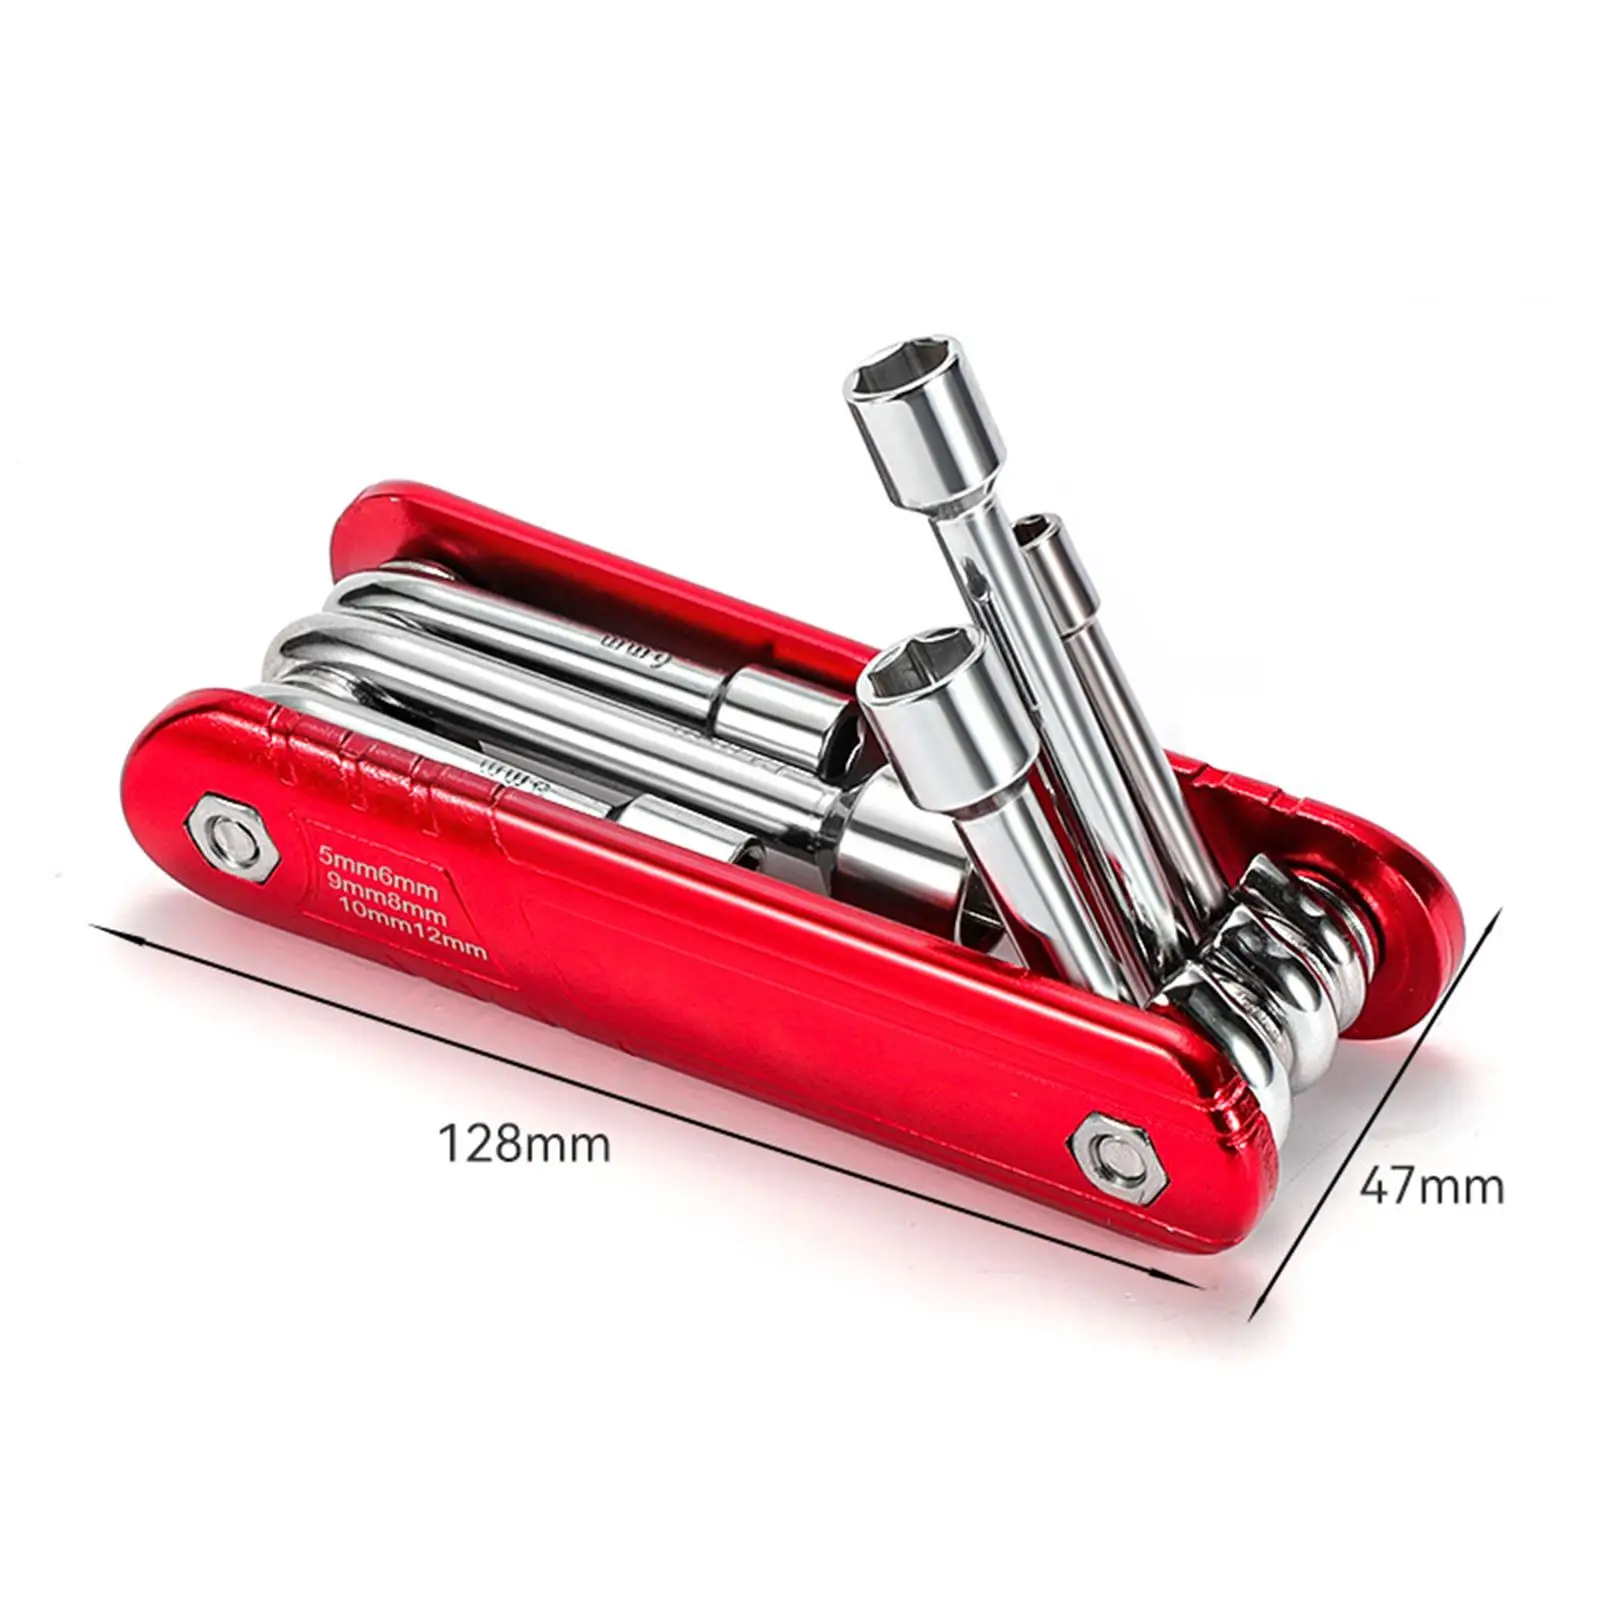 Folding Socket Wrench Set Easy to Carry Compact Universal Combination Premium Hand Tools High Strength Hex Nut Driver Set 6 in 1